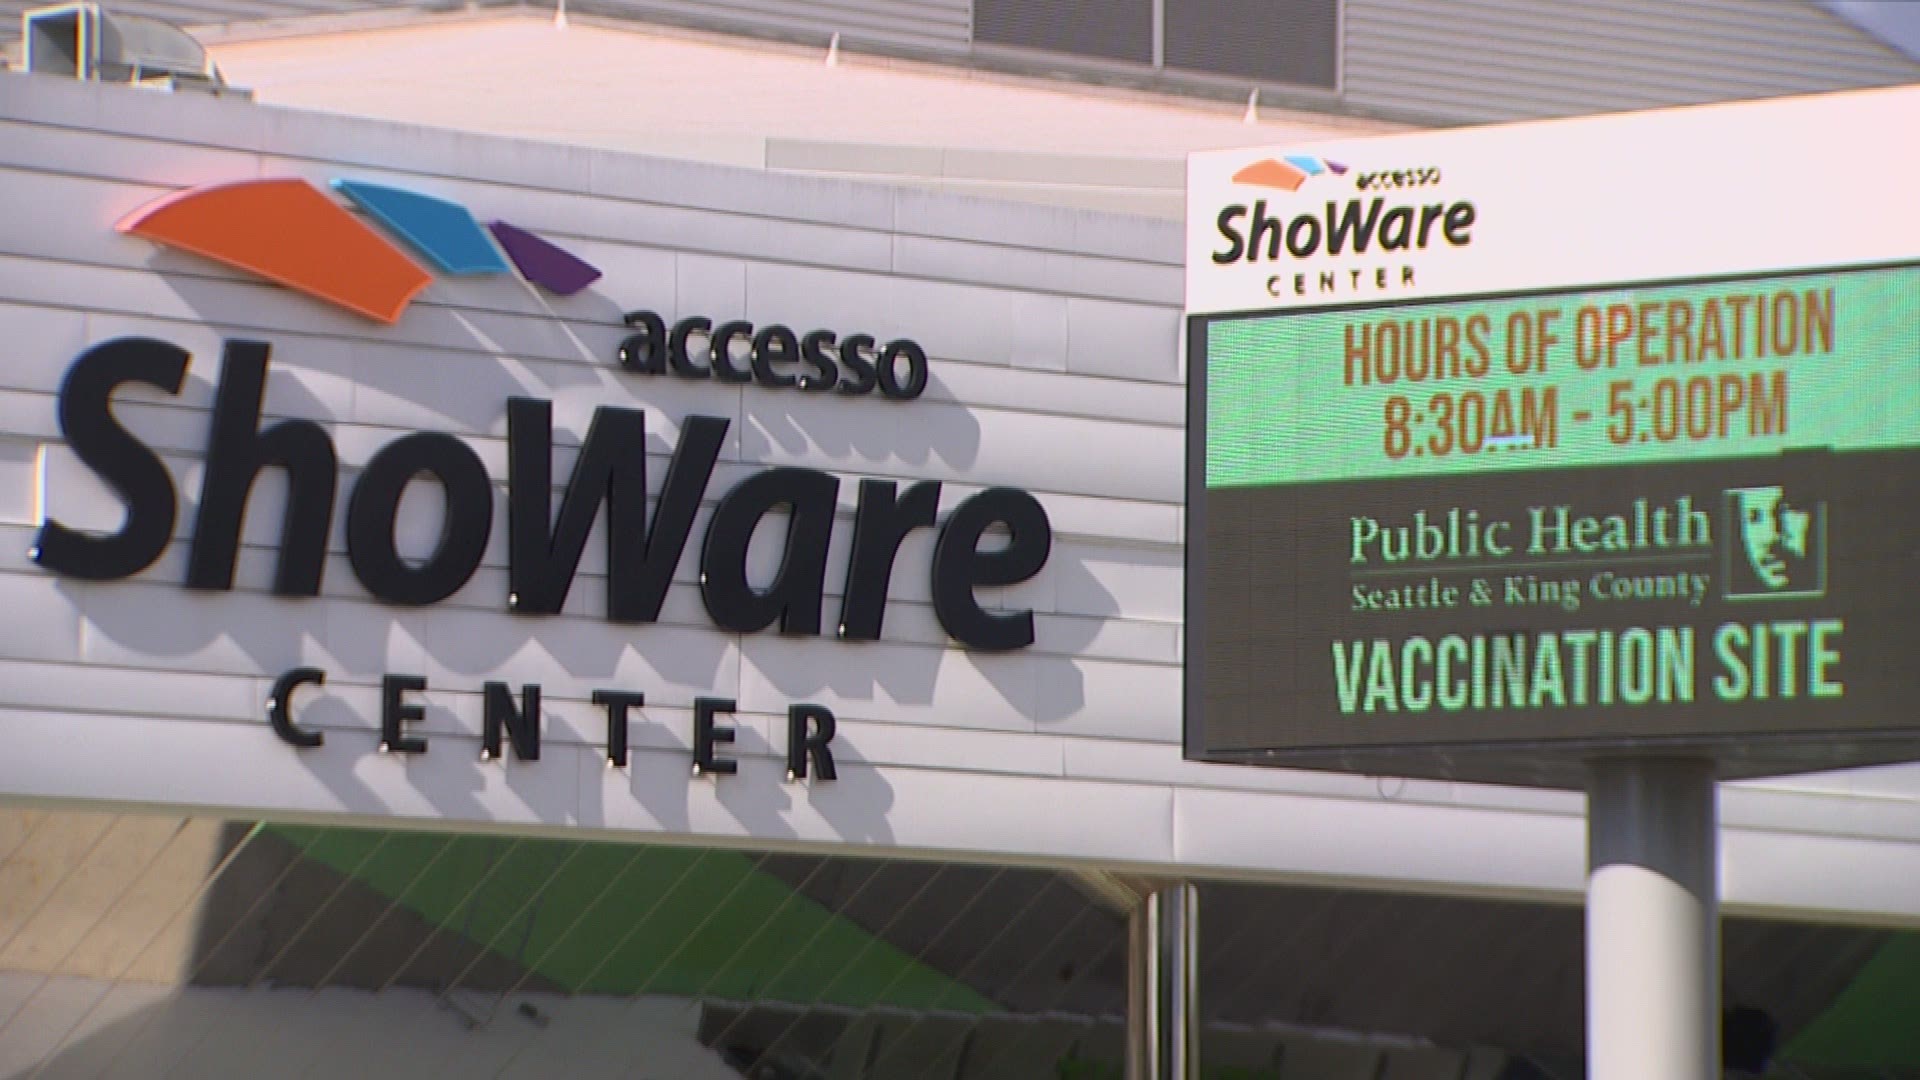 COVID-19 restrictions in 2020 forced the accesso ShoWare Center to cancel dozens of events, resulting in major revenue losses and employee lay offs.